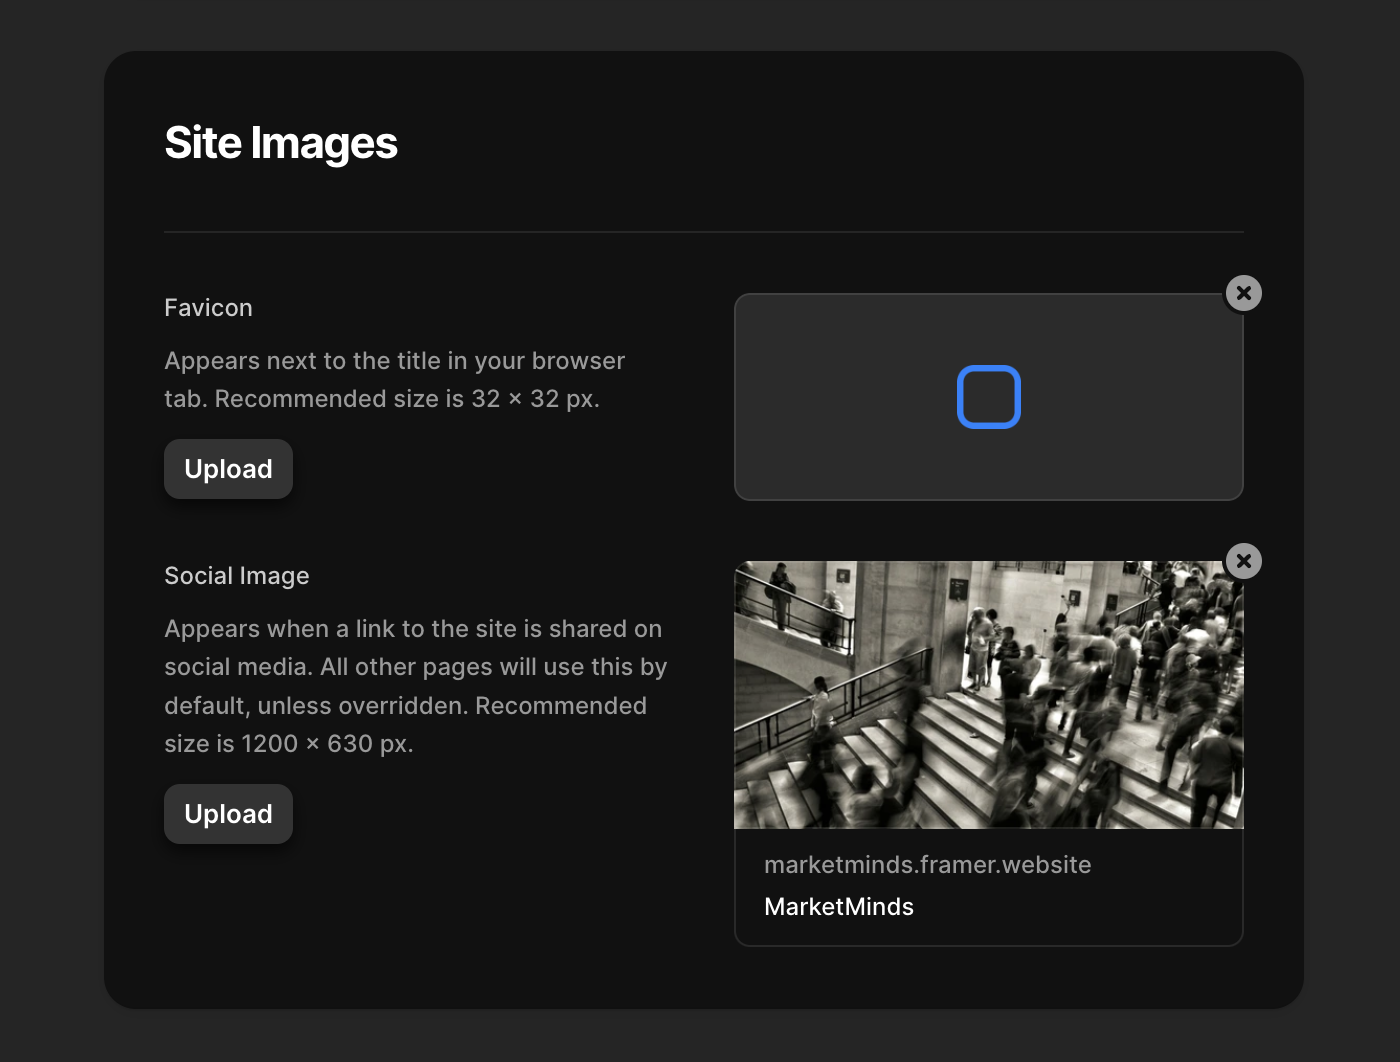 Framer interface to edit SEO settings on your site and site images